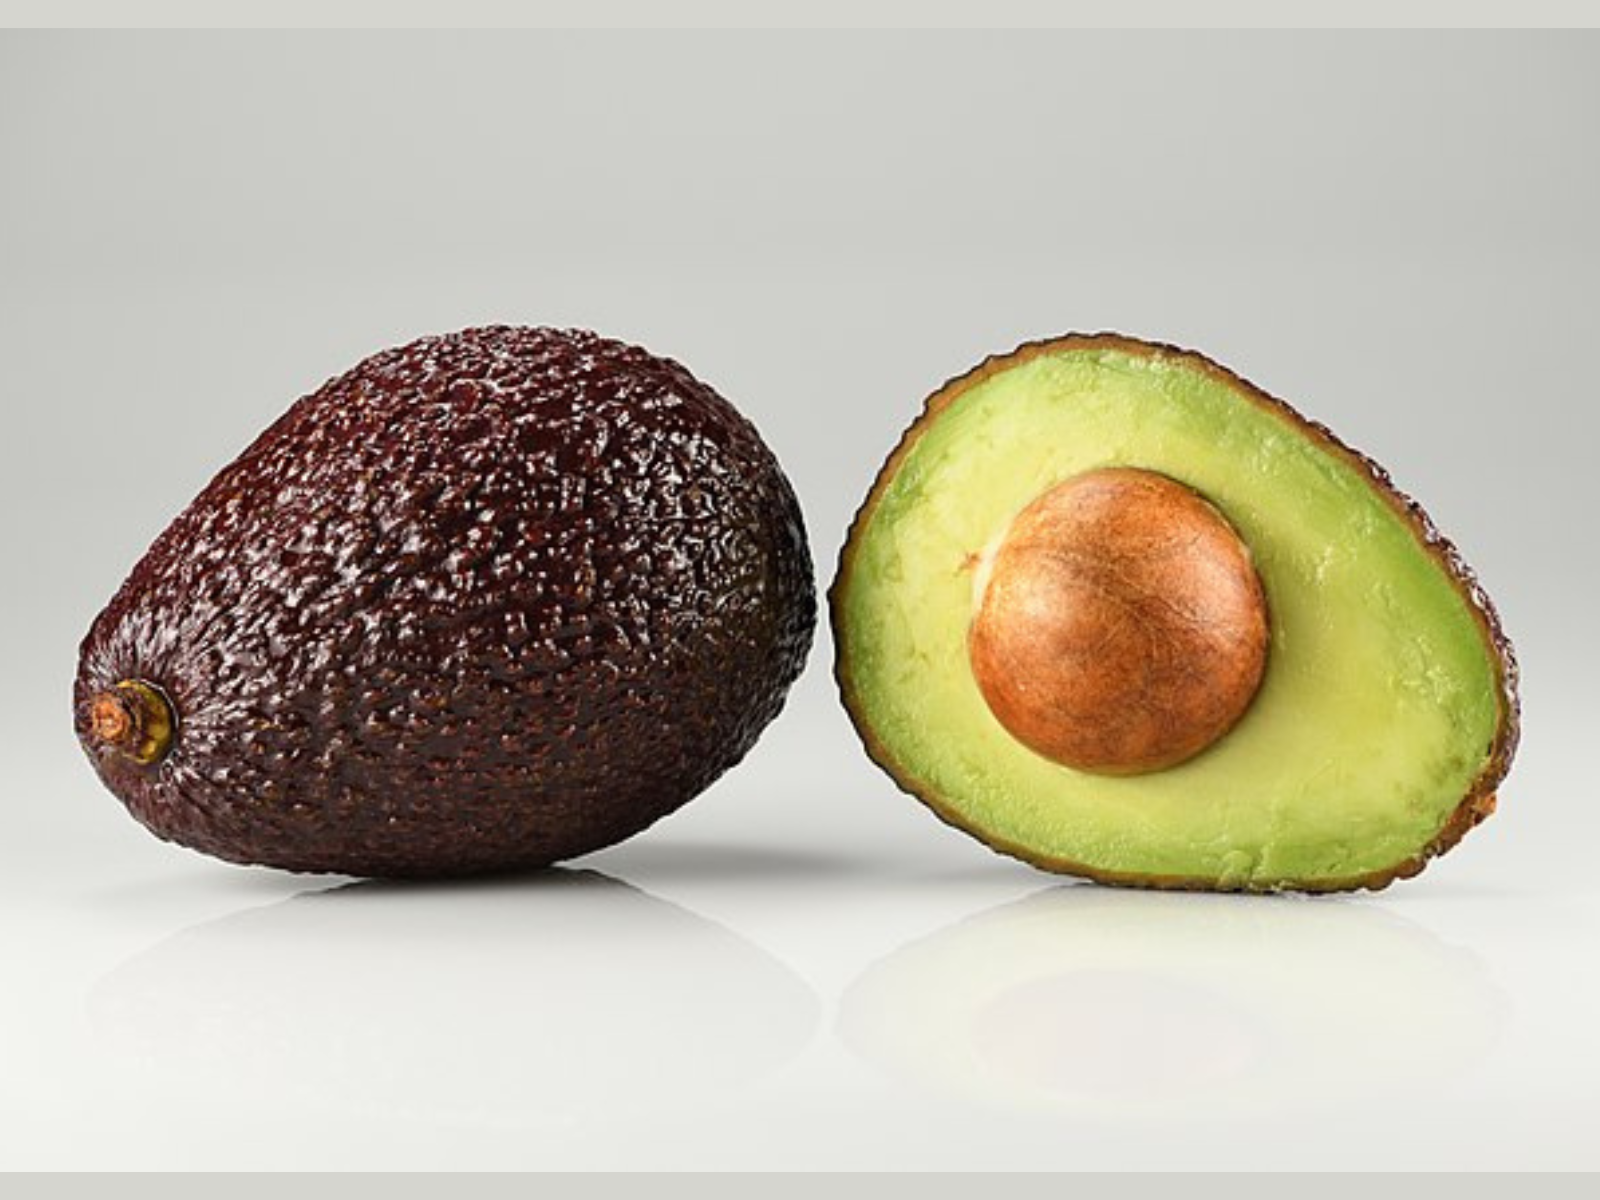 Two avocados on a grey background. The avocado on the left is whole, with purple-brown skin, and the one of the right has been cut in half showing the green flesh and round brown seed.